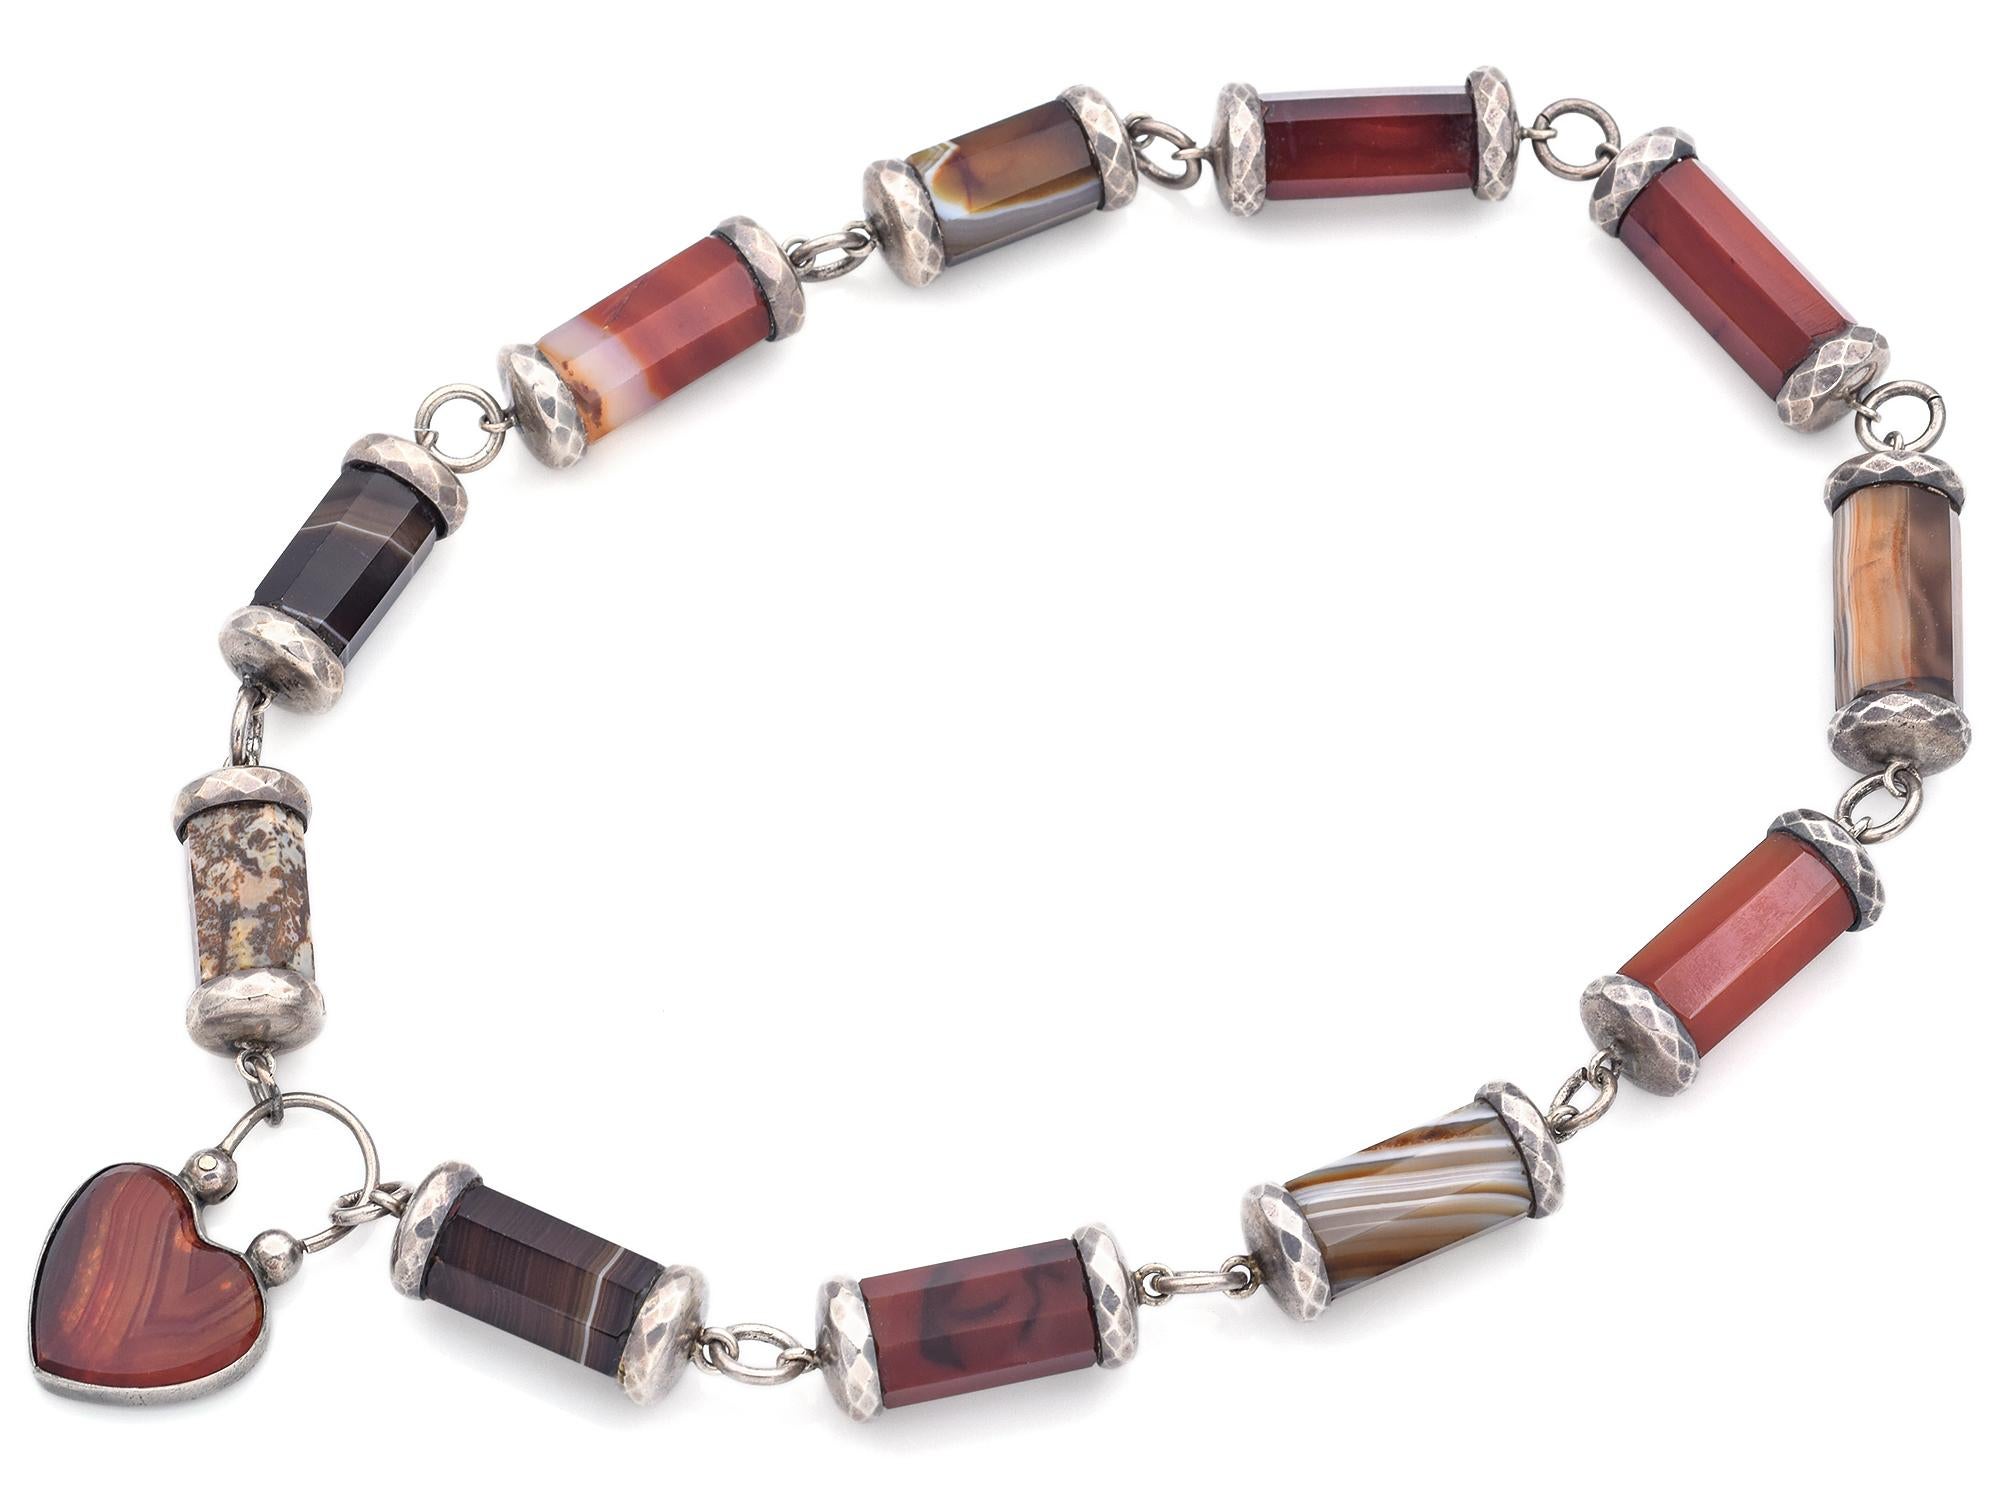 Weight: 72.3 Grams
Stone: Scottish Agate  (20.0 x 9.5 - 20.0 x 18.0 mm)
Pendant: 33.5 x 21  mm
Length: 16 Inches
Hallmark: Silver Tested

Item #: BR-1067-101023-19